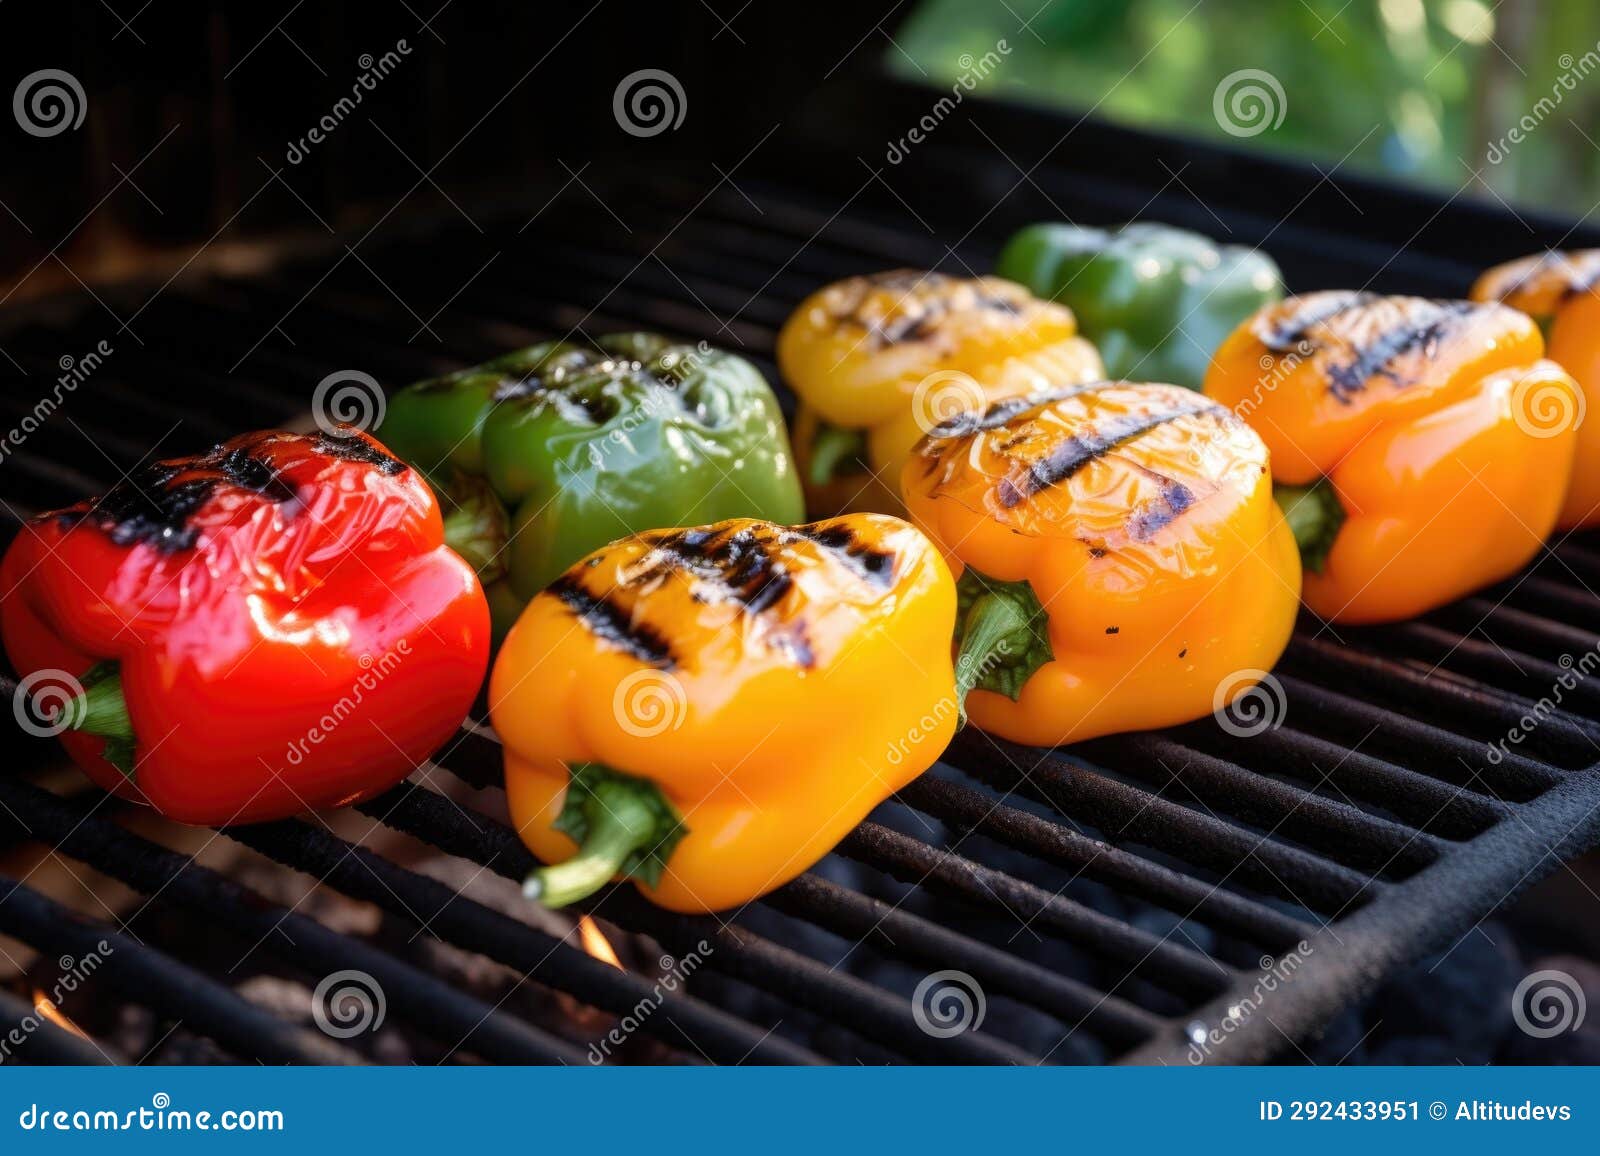 Grilled Bell Peppers on a Garden Grill Stock Image - Image of delicious ...